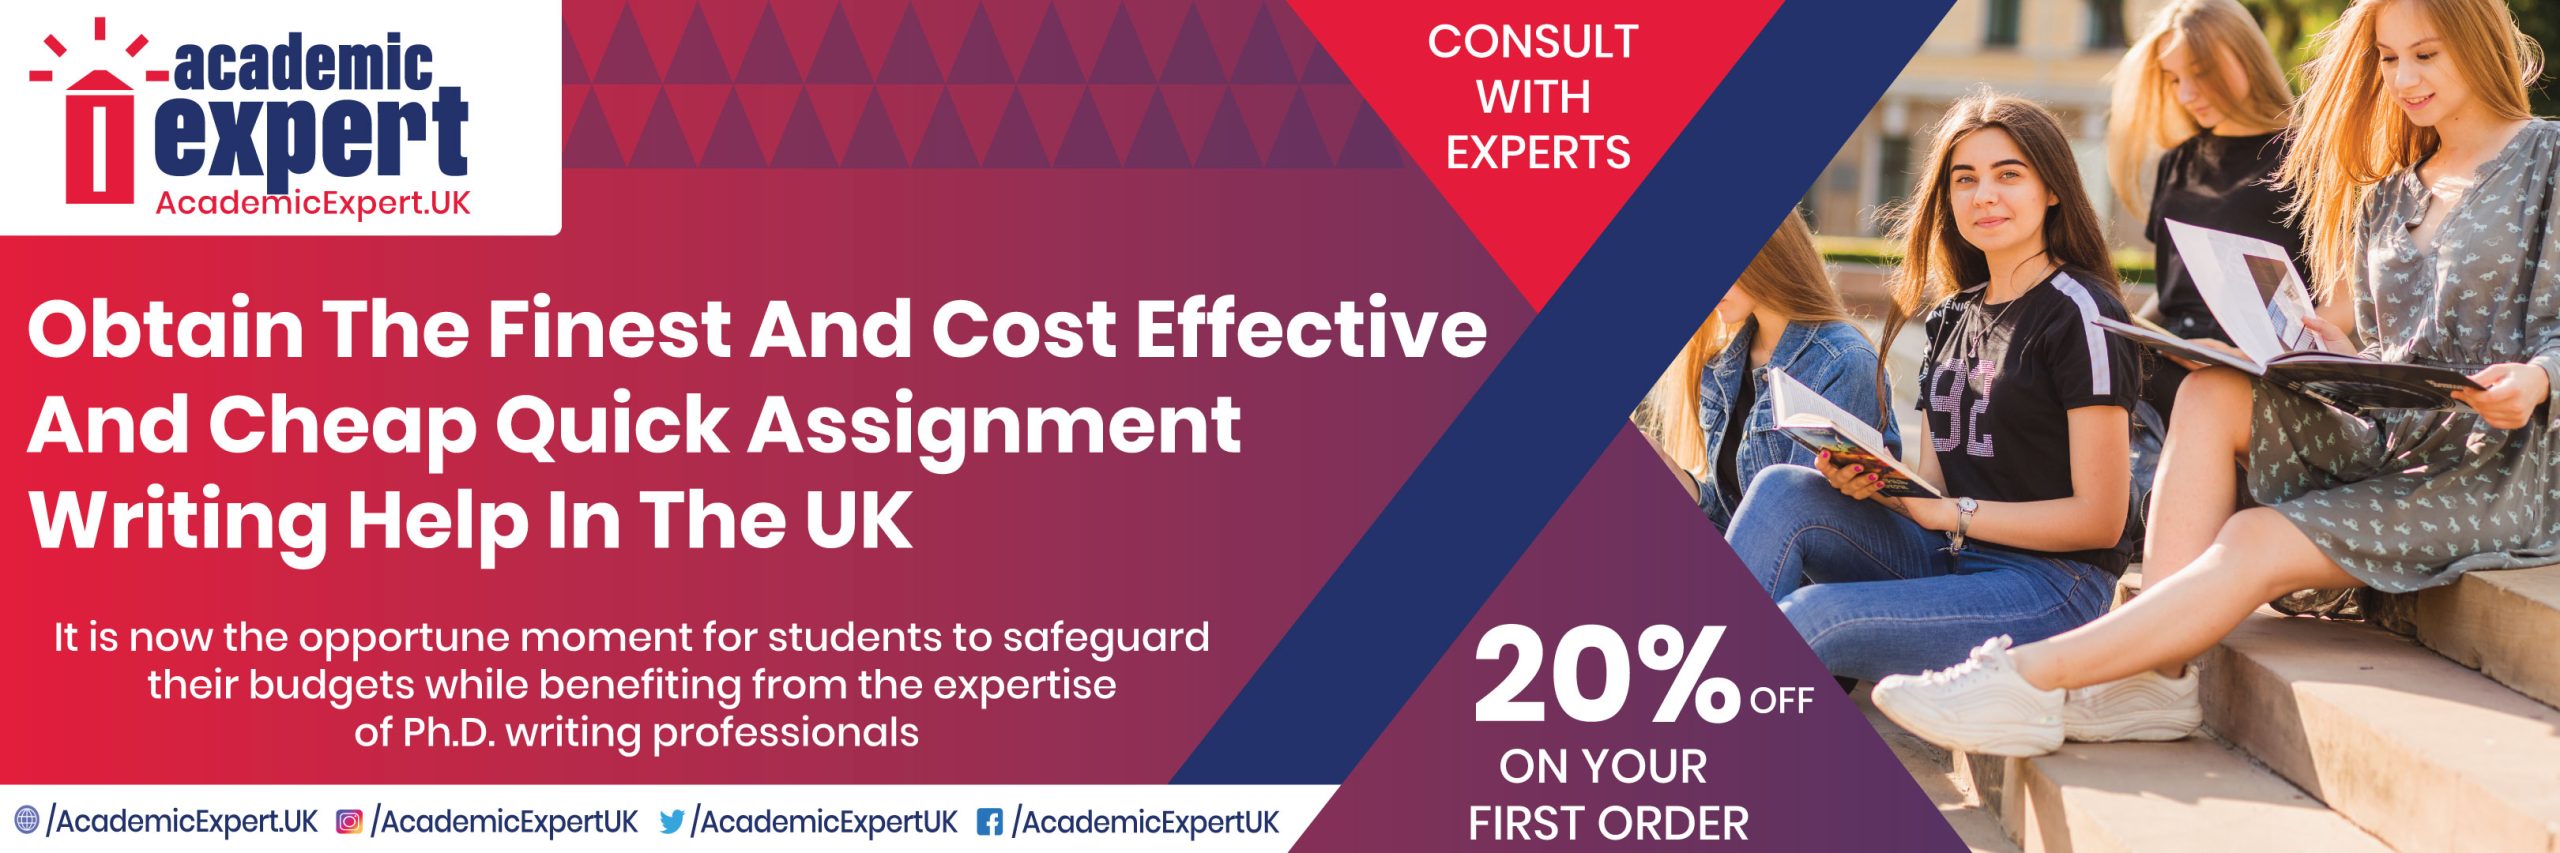 OBTAIN THE FINEST AND COST-EFFECTIVE AND CHEAP QUICK ASSIGNMENT WRITING HELP IN THE UK